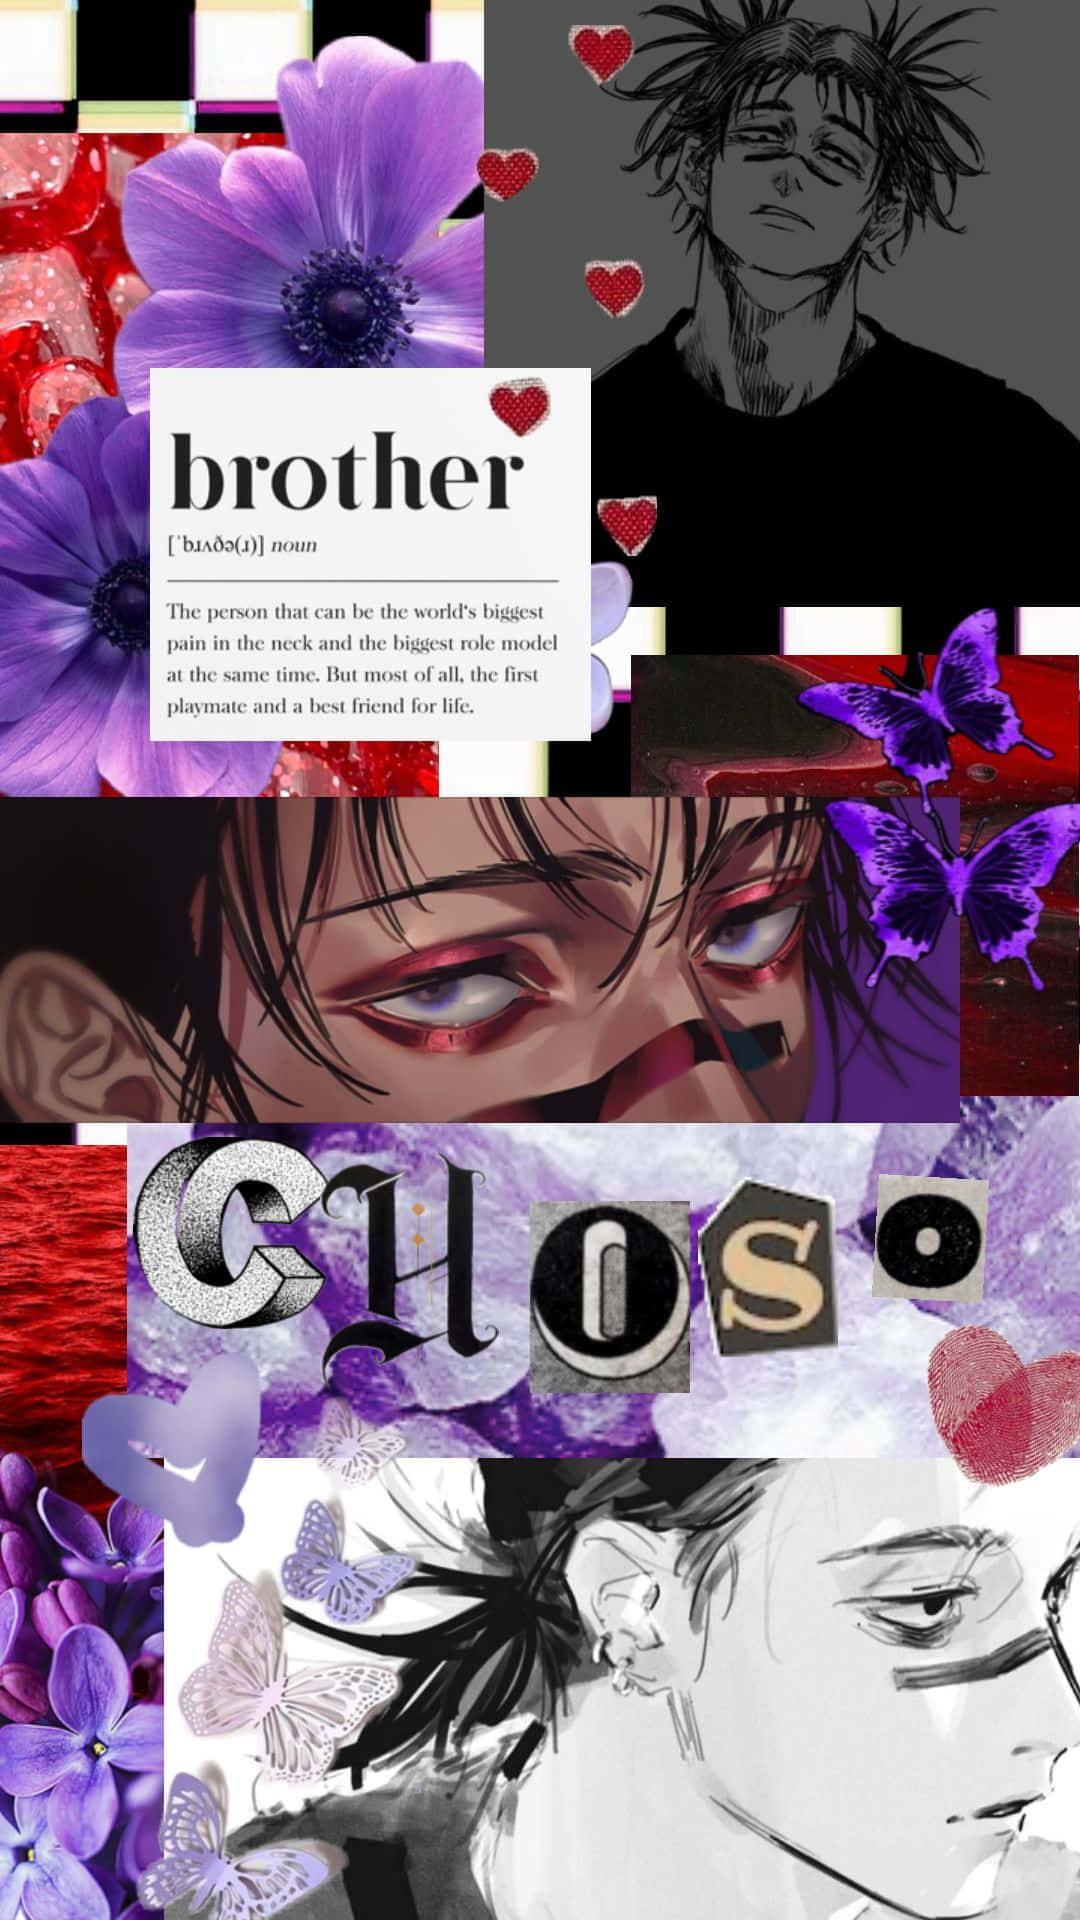 Choso Aesthetic Collage Wallpaper